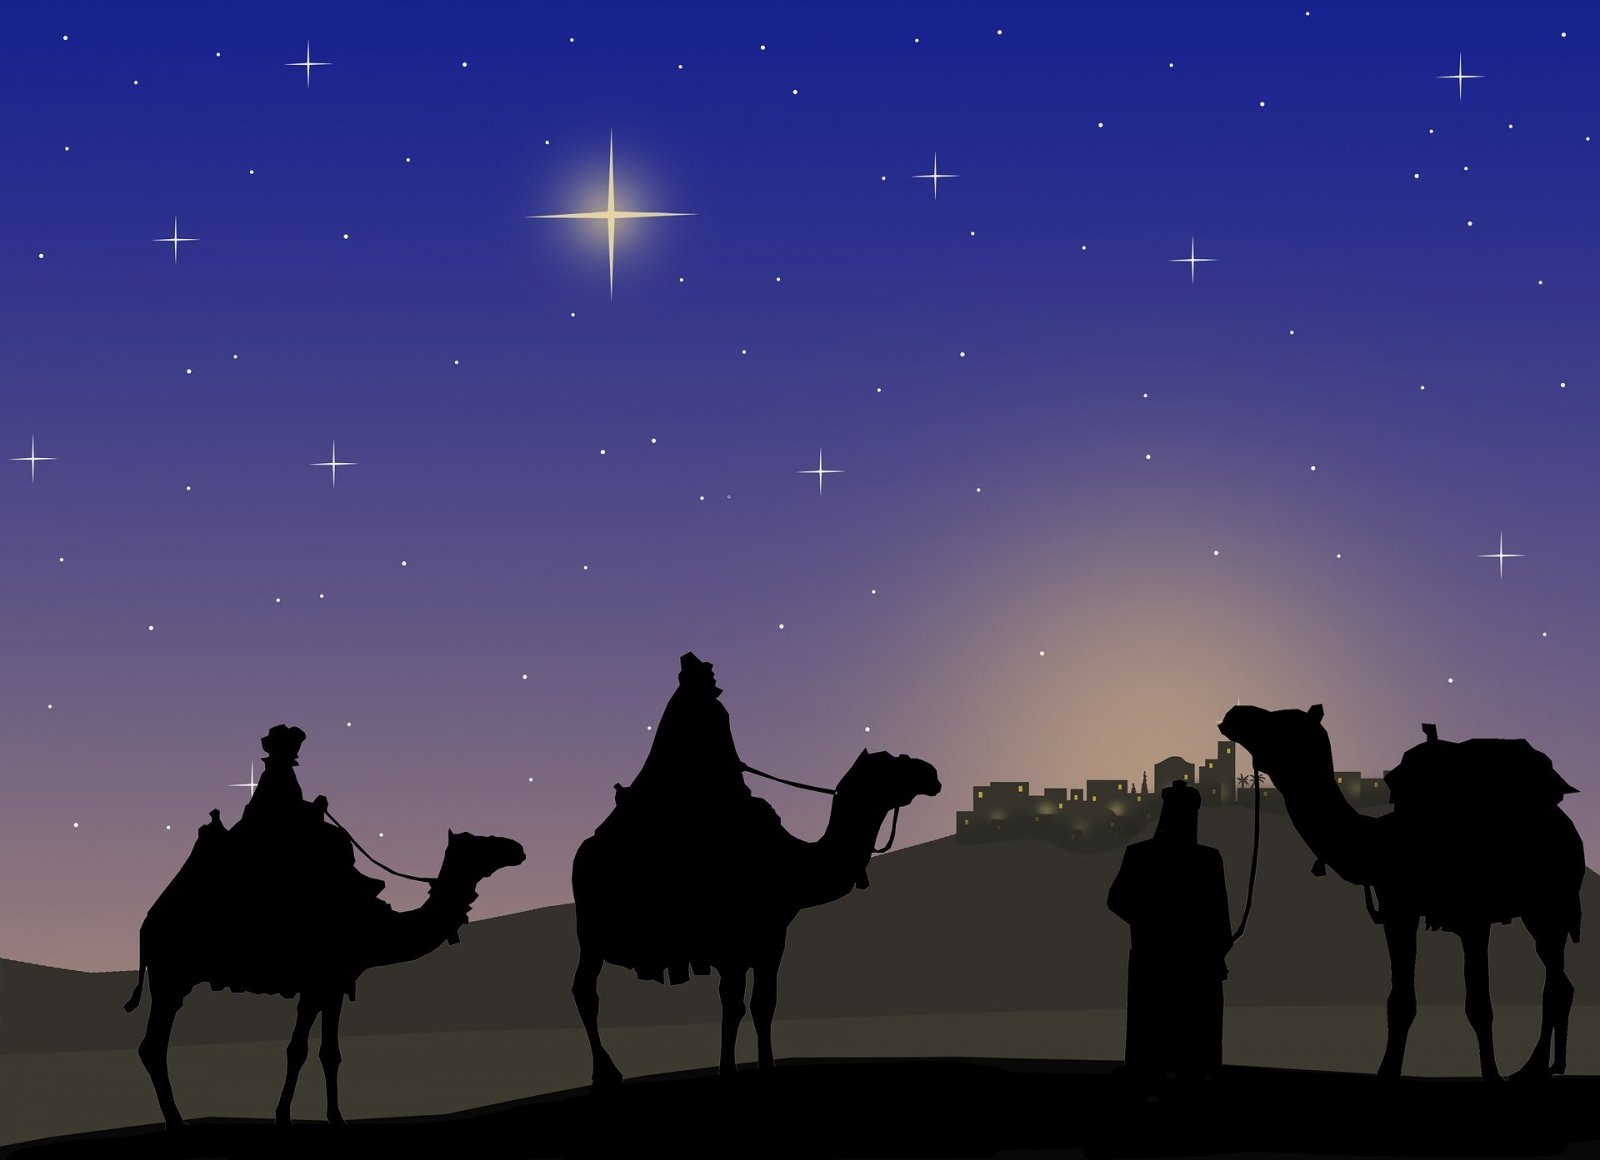 A message from our Provincial on the Feast of the Epiphany